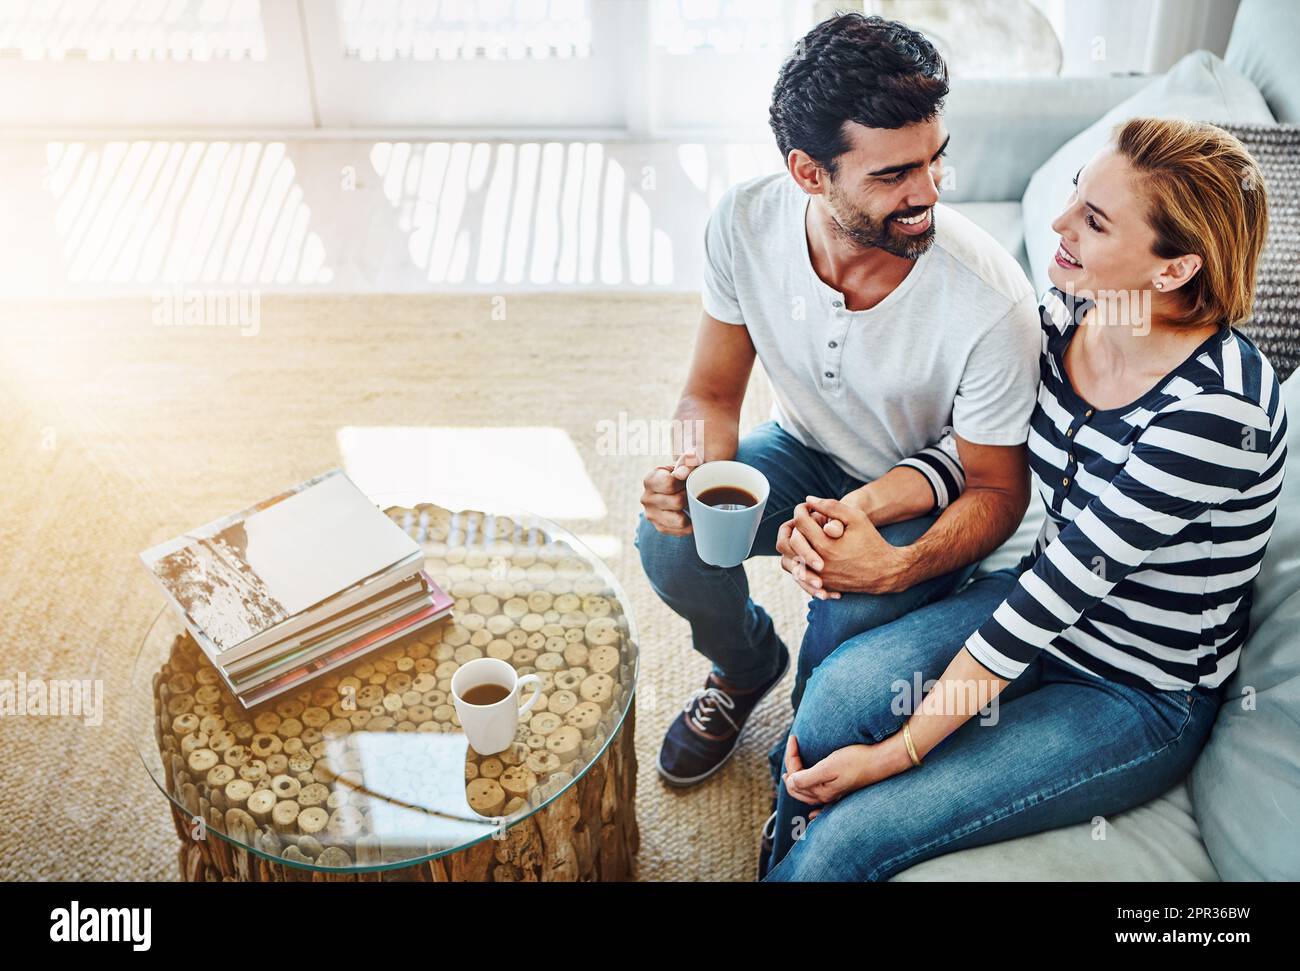 Getting closer with every passing moment. High angle shot of an affectionate young couple having coffee together at home. Stock Photo